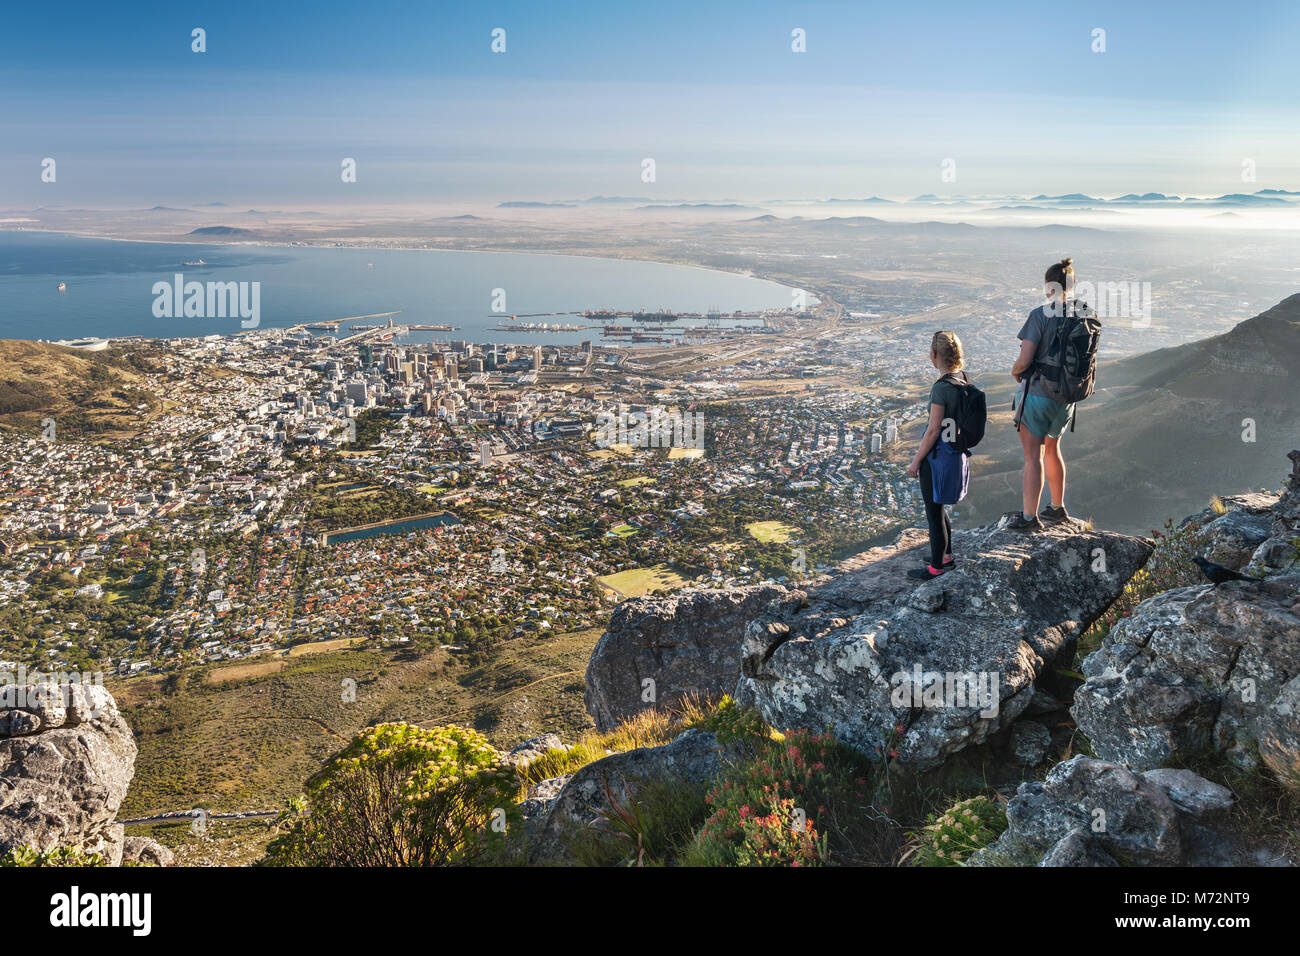 Two hikers admiring the view of Cape Town from a viewpoint along the India Venster hiking path on Table Mountain. Stock Photo